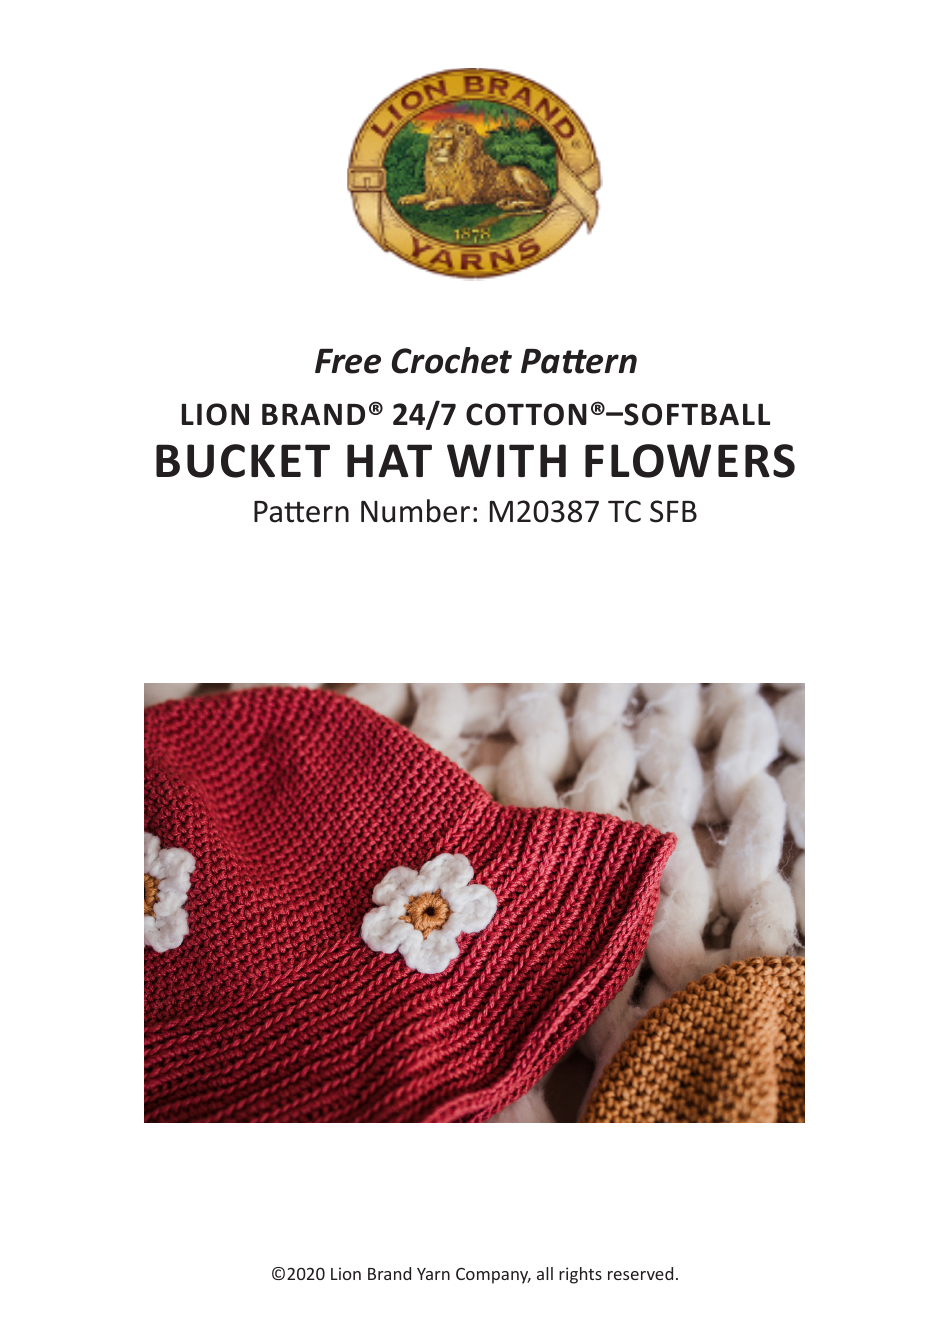 Crochet pattern for a beautiful Bucket Hat With Flowers design by Lion Brand Yarn Company